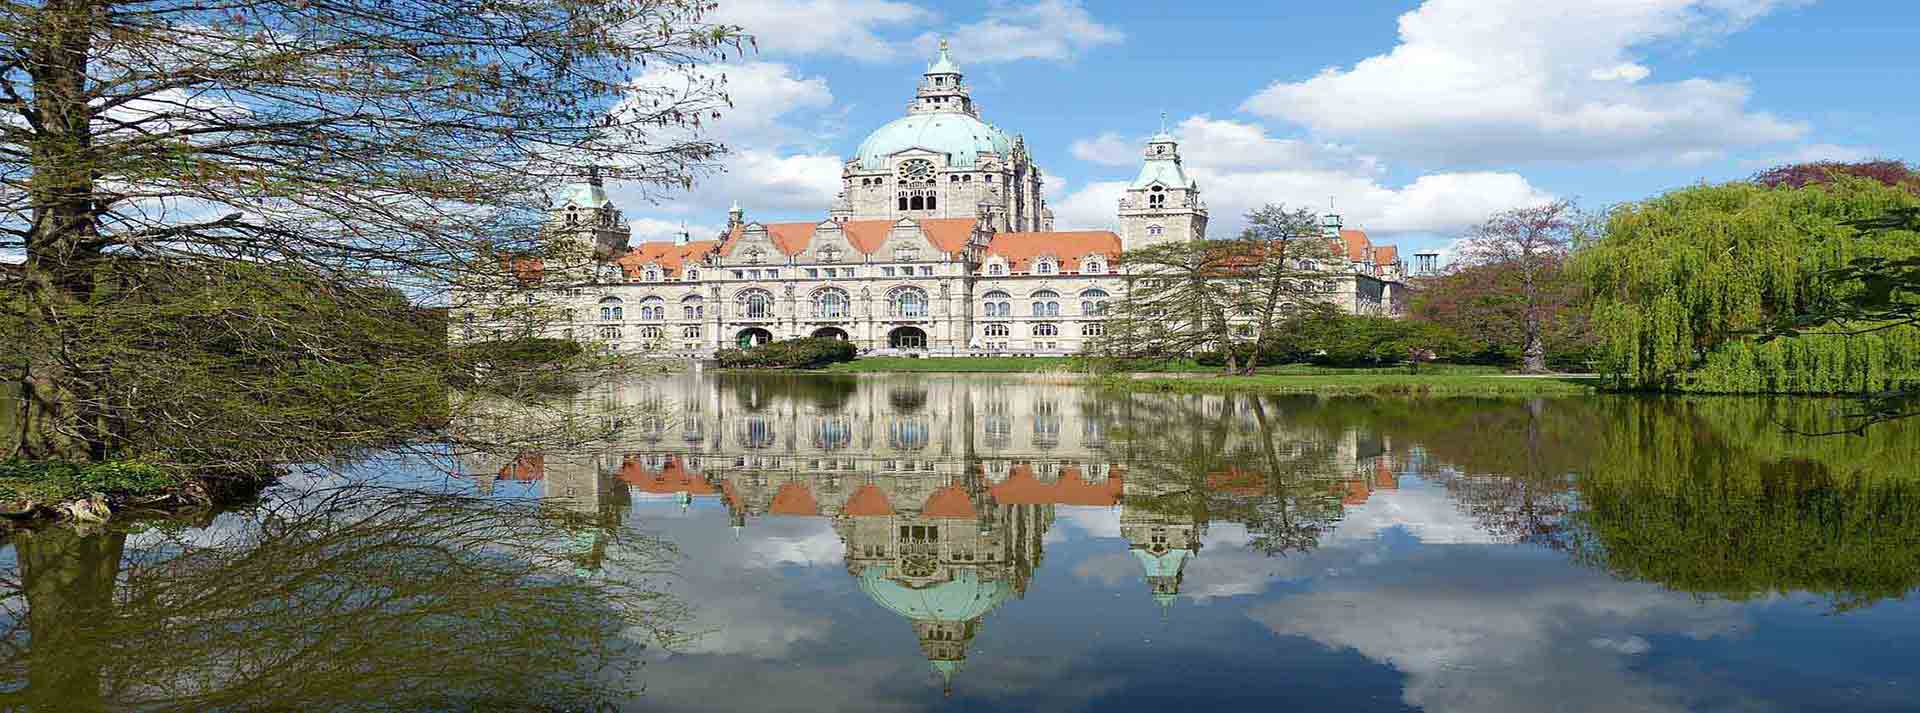 hannover castle